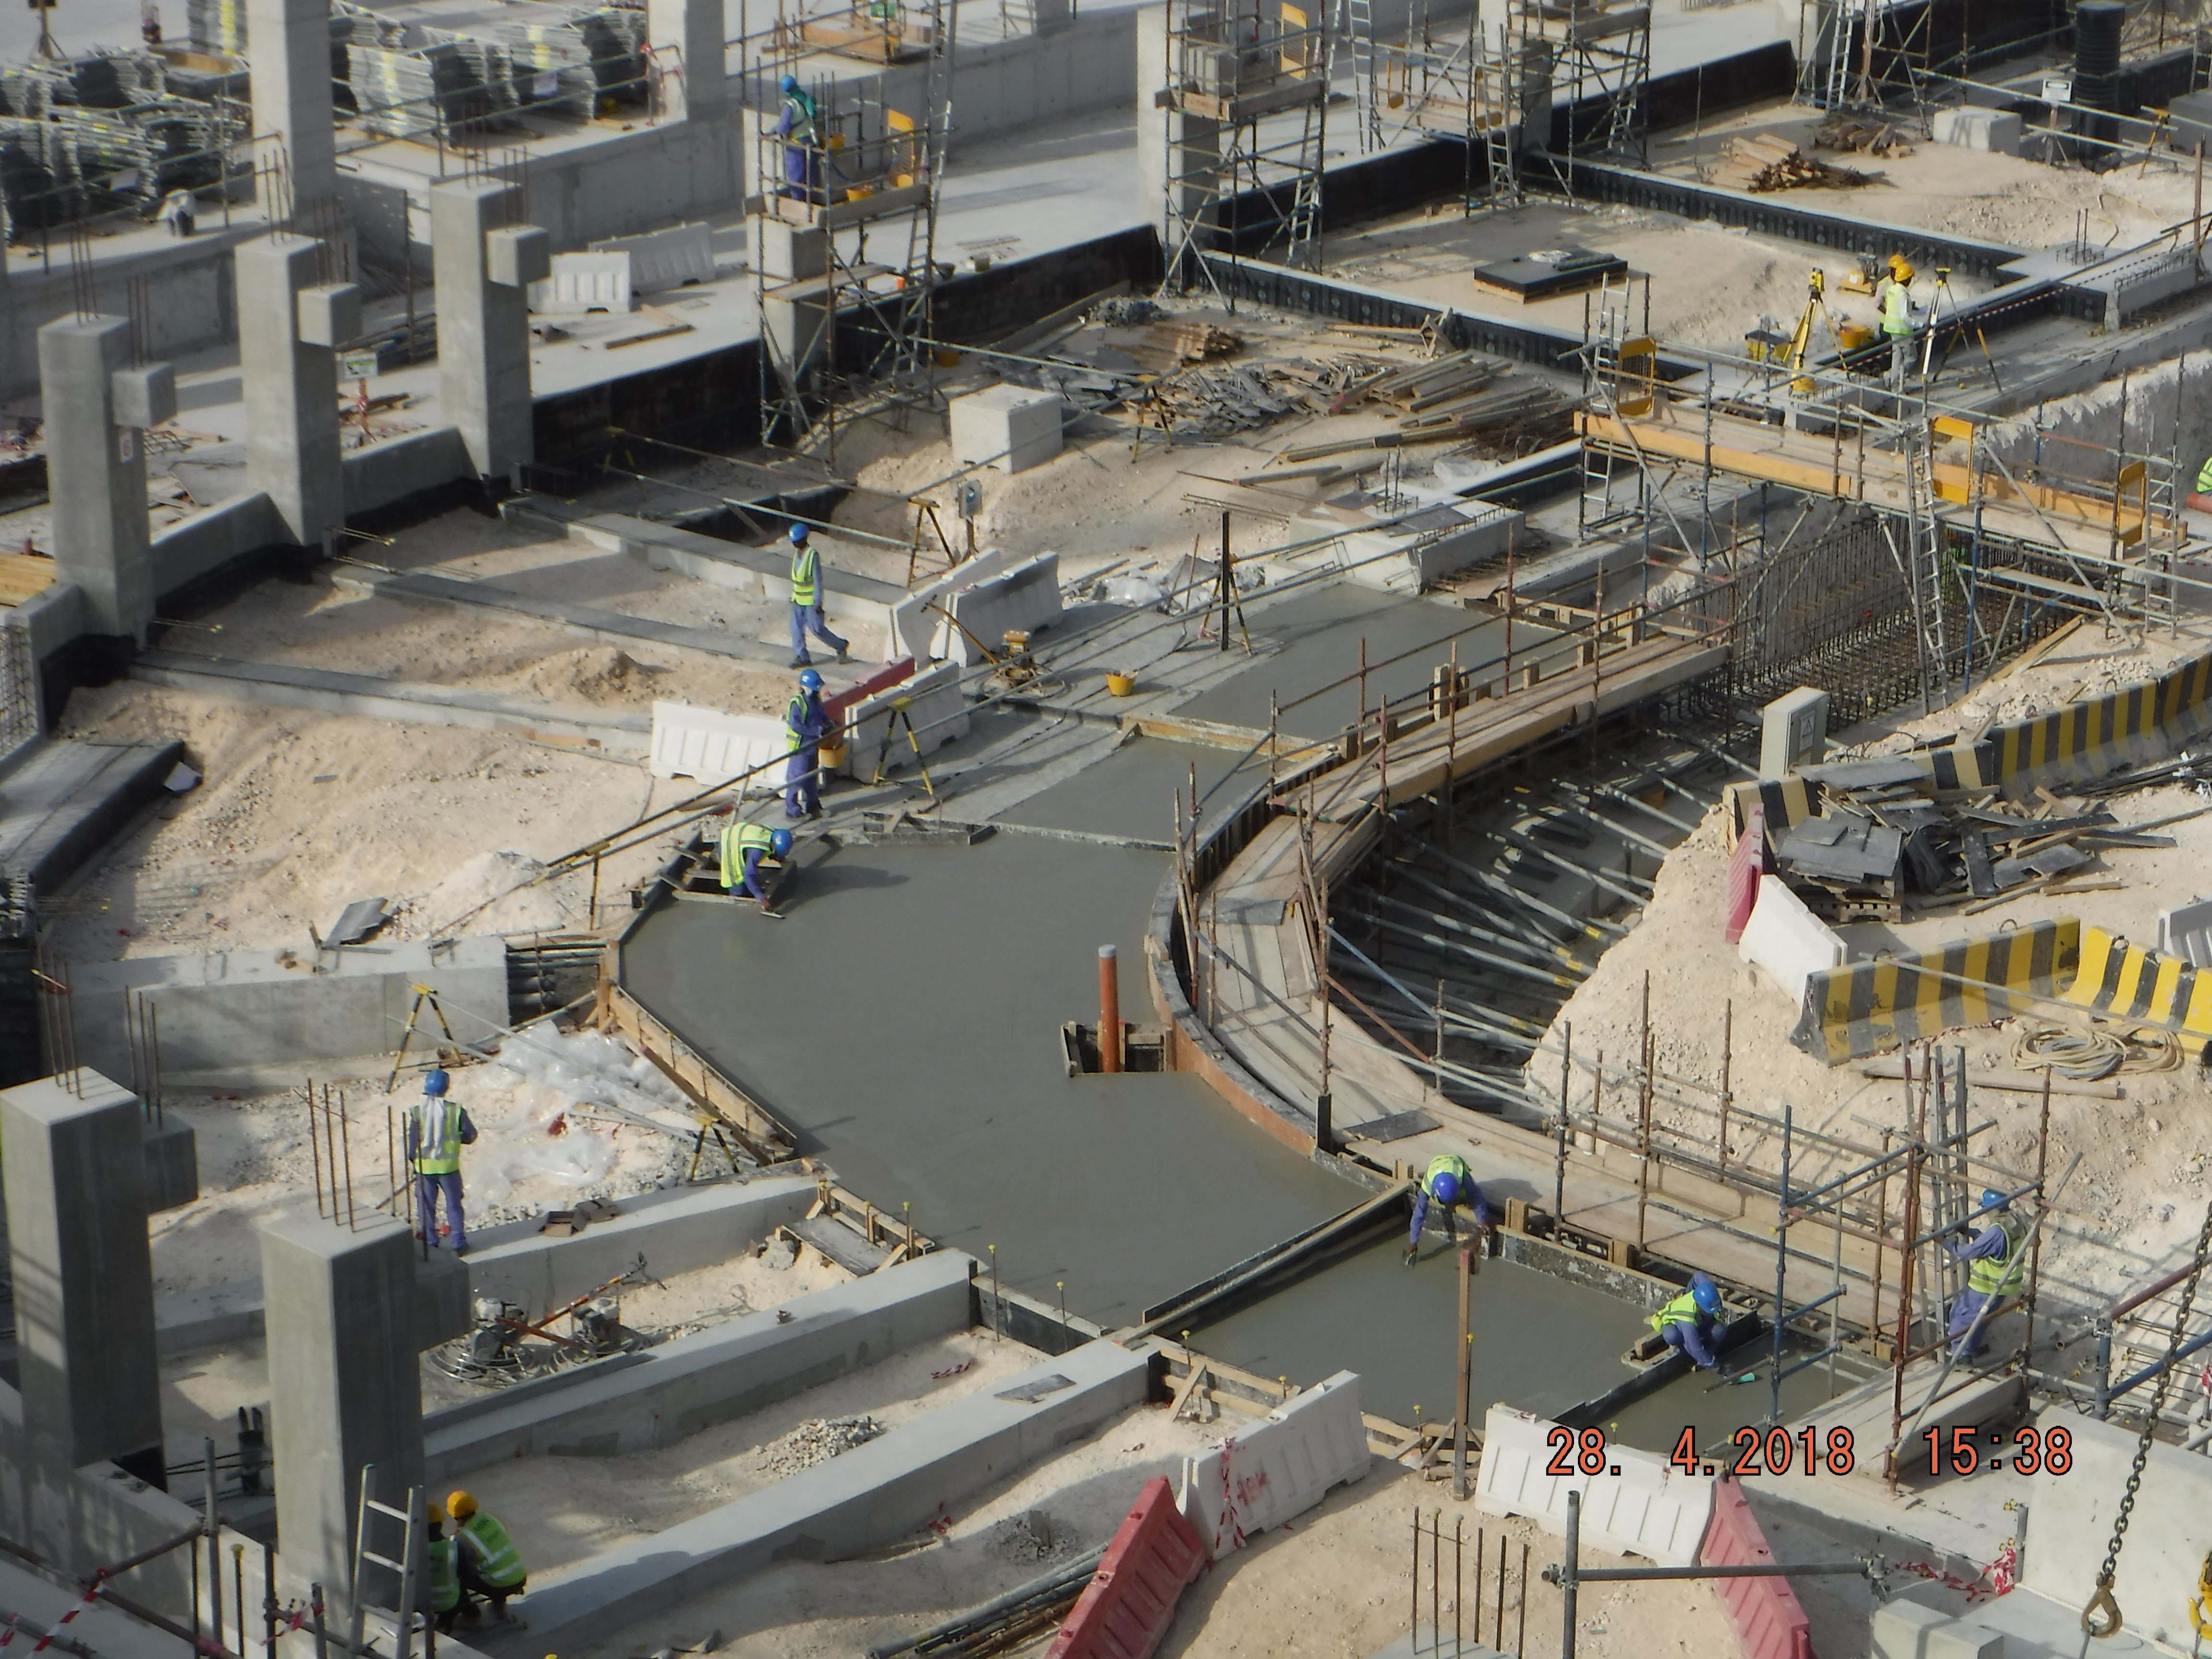 China is also extensively involved in the infrastructure boom in Qatar, playing an integral part in the construction of the Lusail Iconic Stadium for the 2022 Fifa World Cup. Photo: Handout